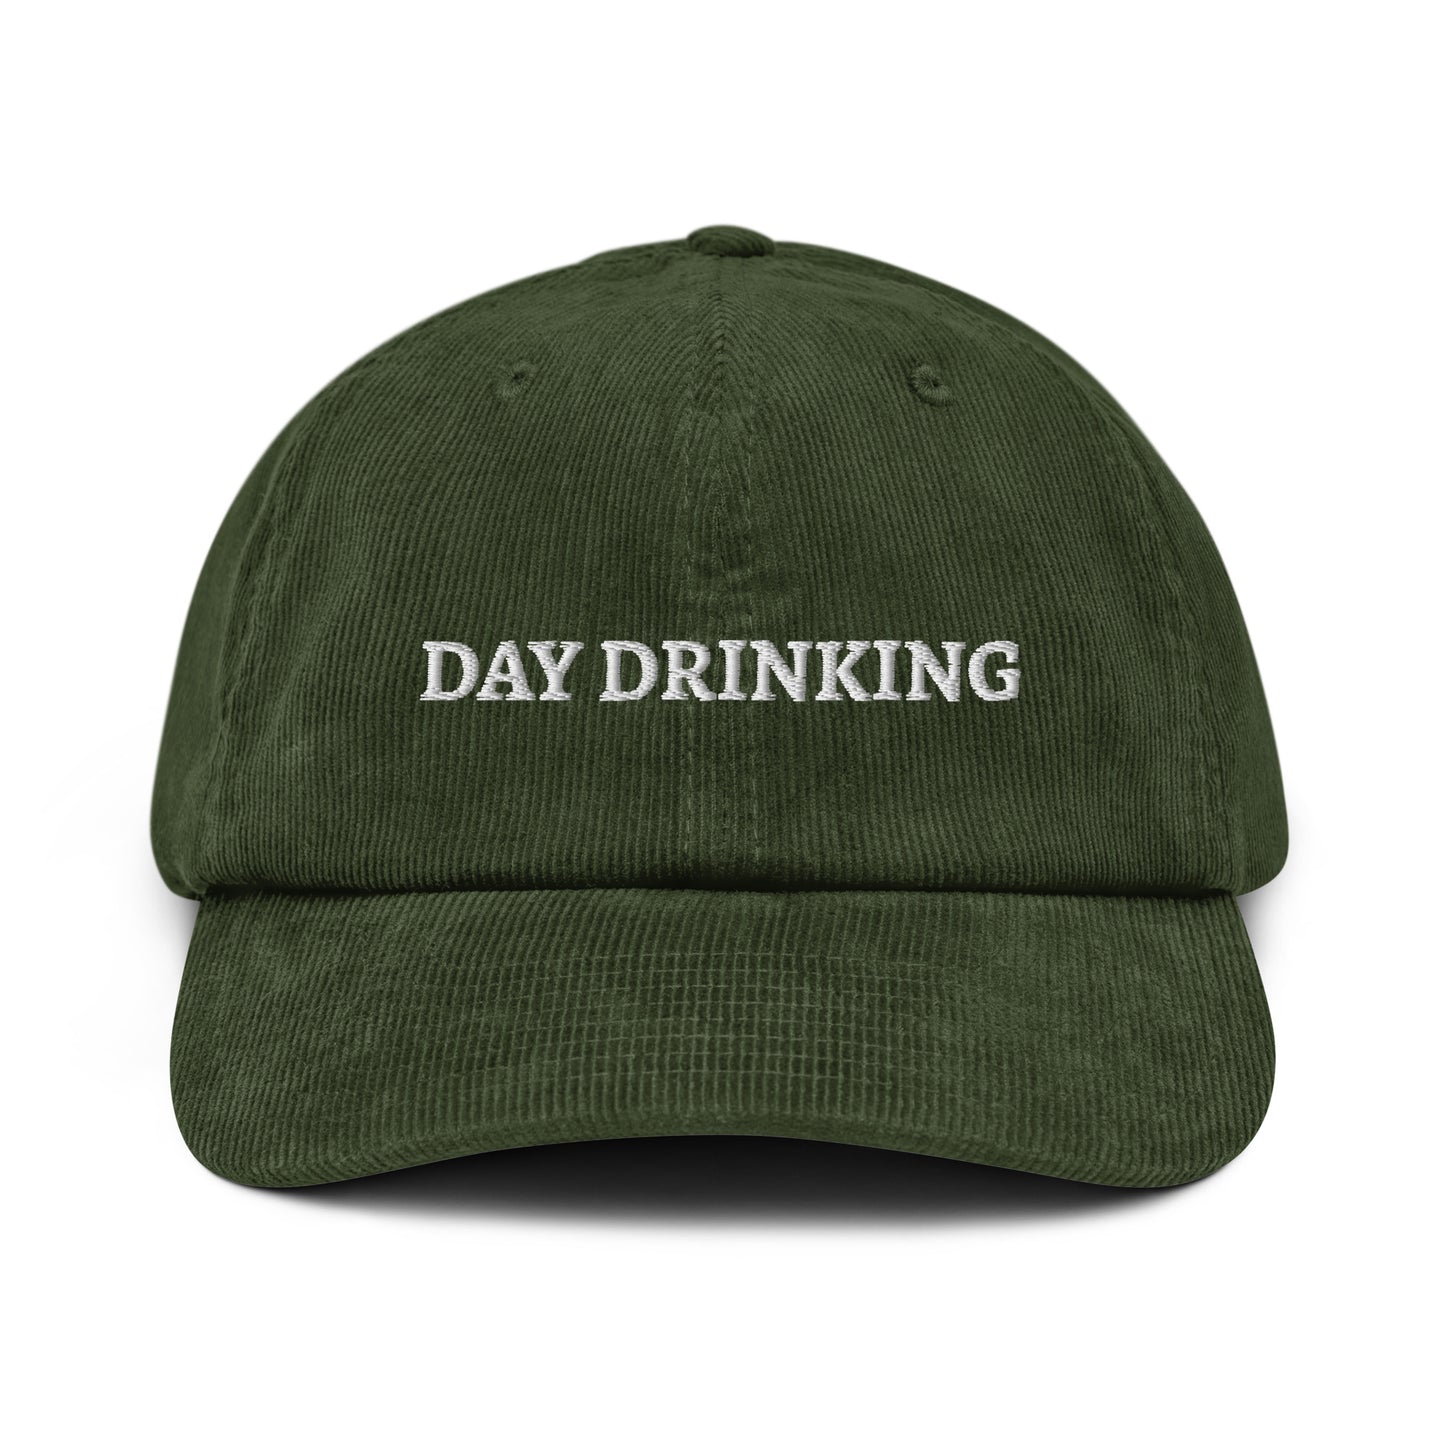 DAY DRINKING Cord-Cap